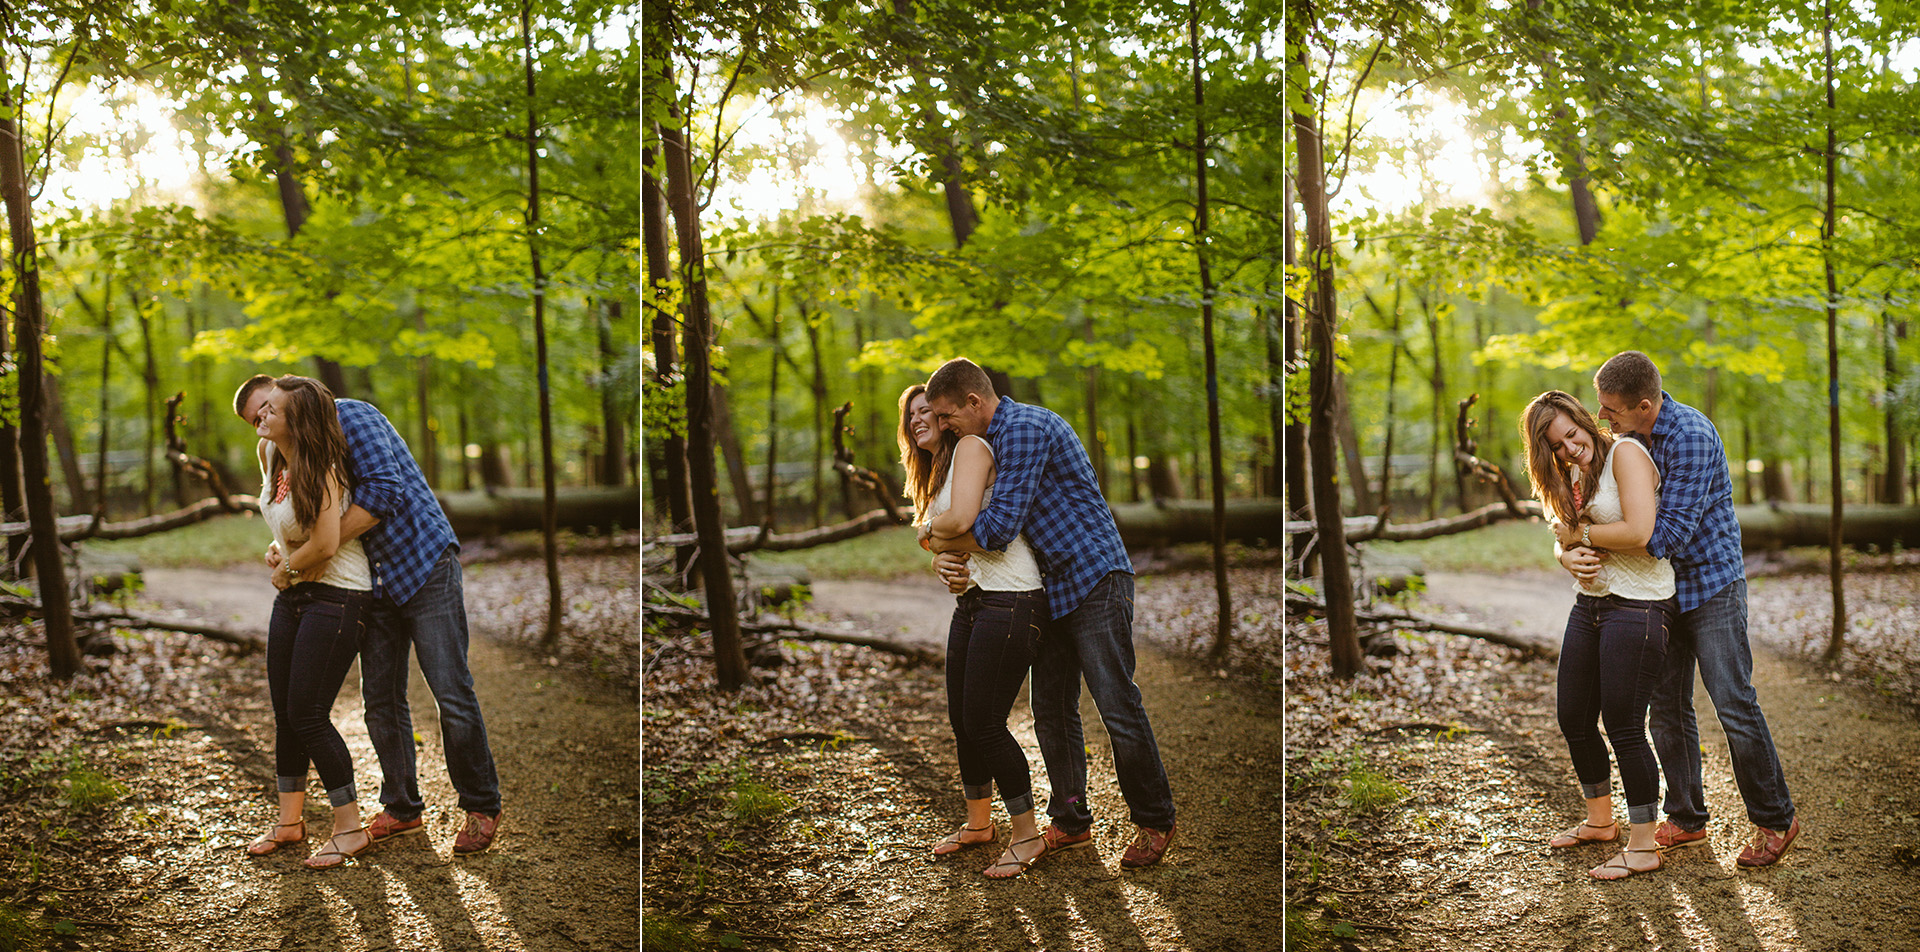 Cleveland Engagement Photographer at the Beach 06.jpg